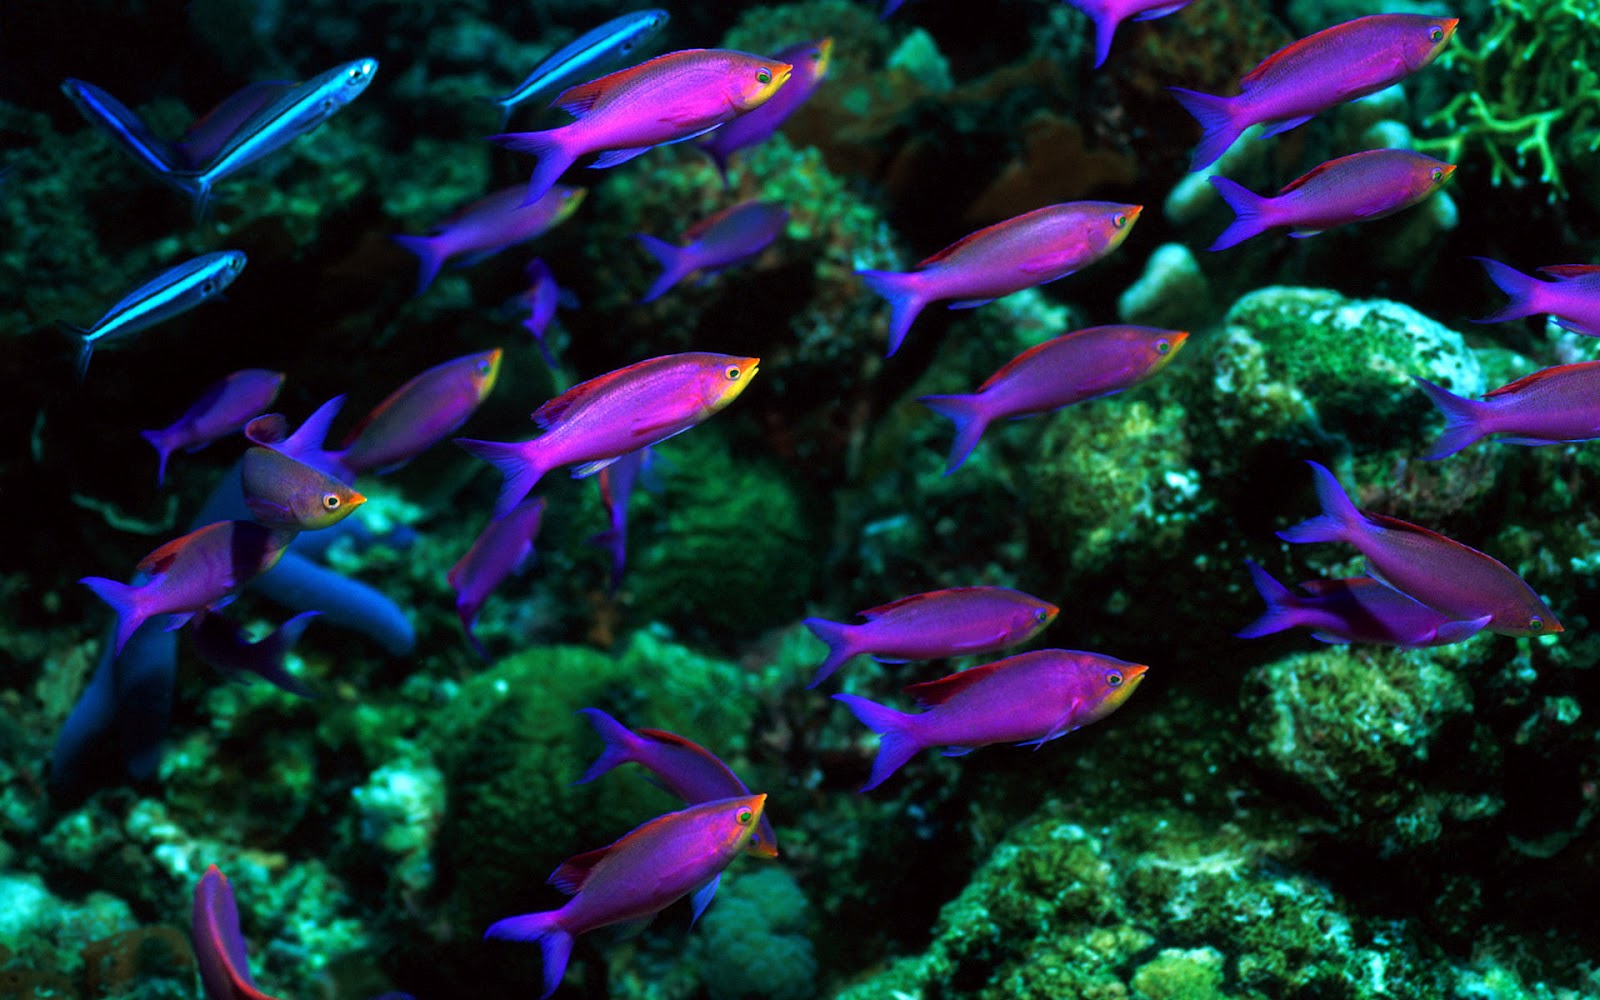 Ocean Life Wallpaper Marine On The Seabed Like Fish Plants